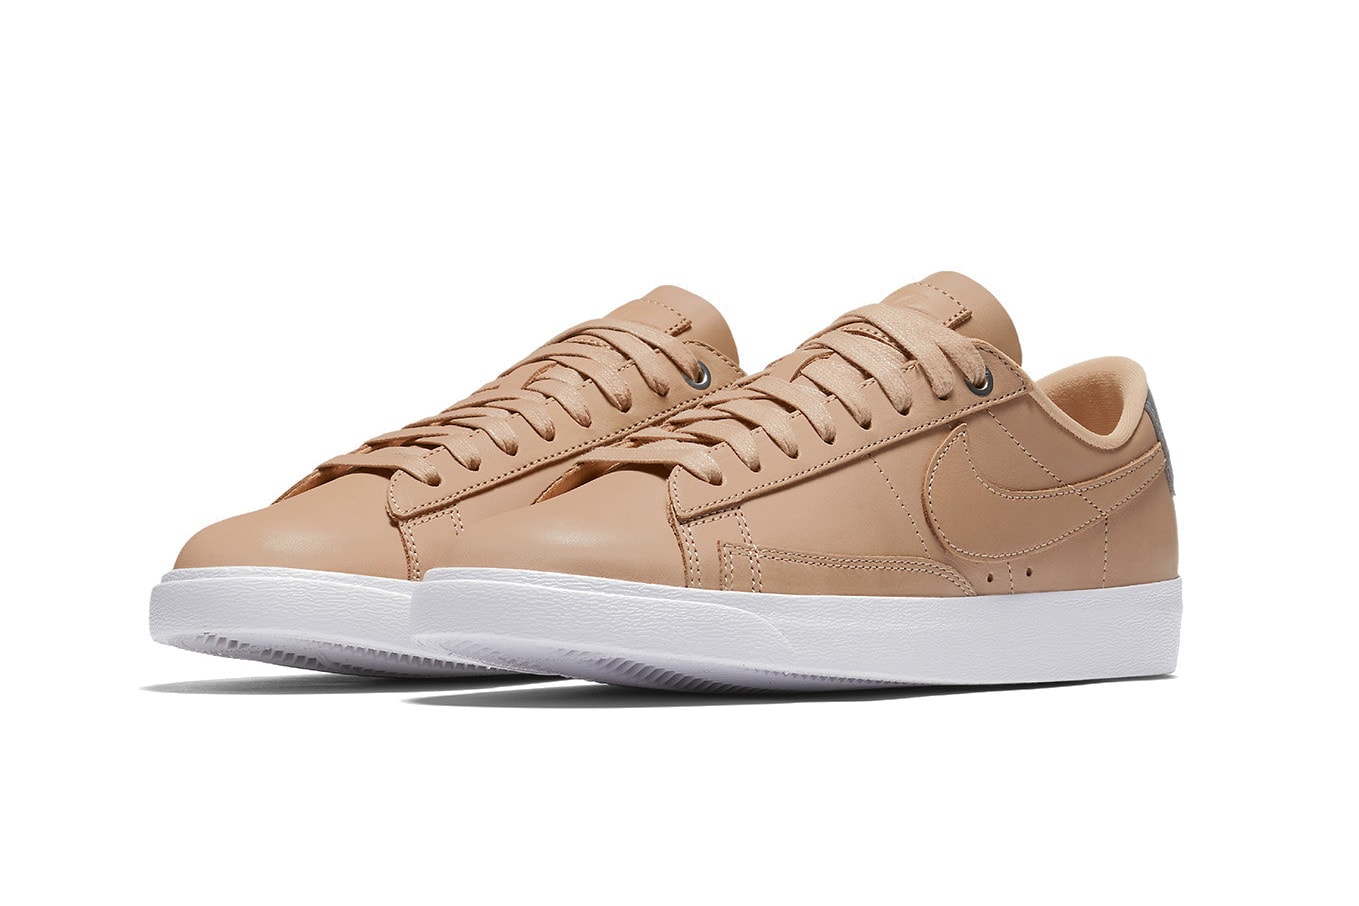 Nike Air Force 1 and Blazer Low in "Tan Silver" Sneaker Silhouette